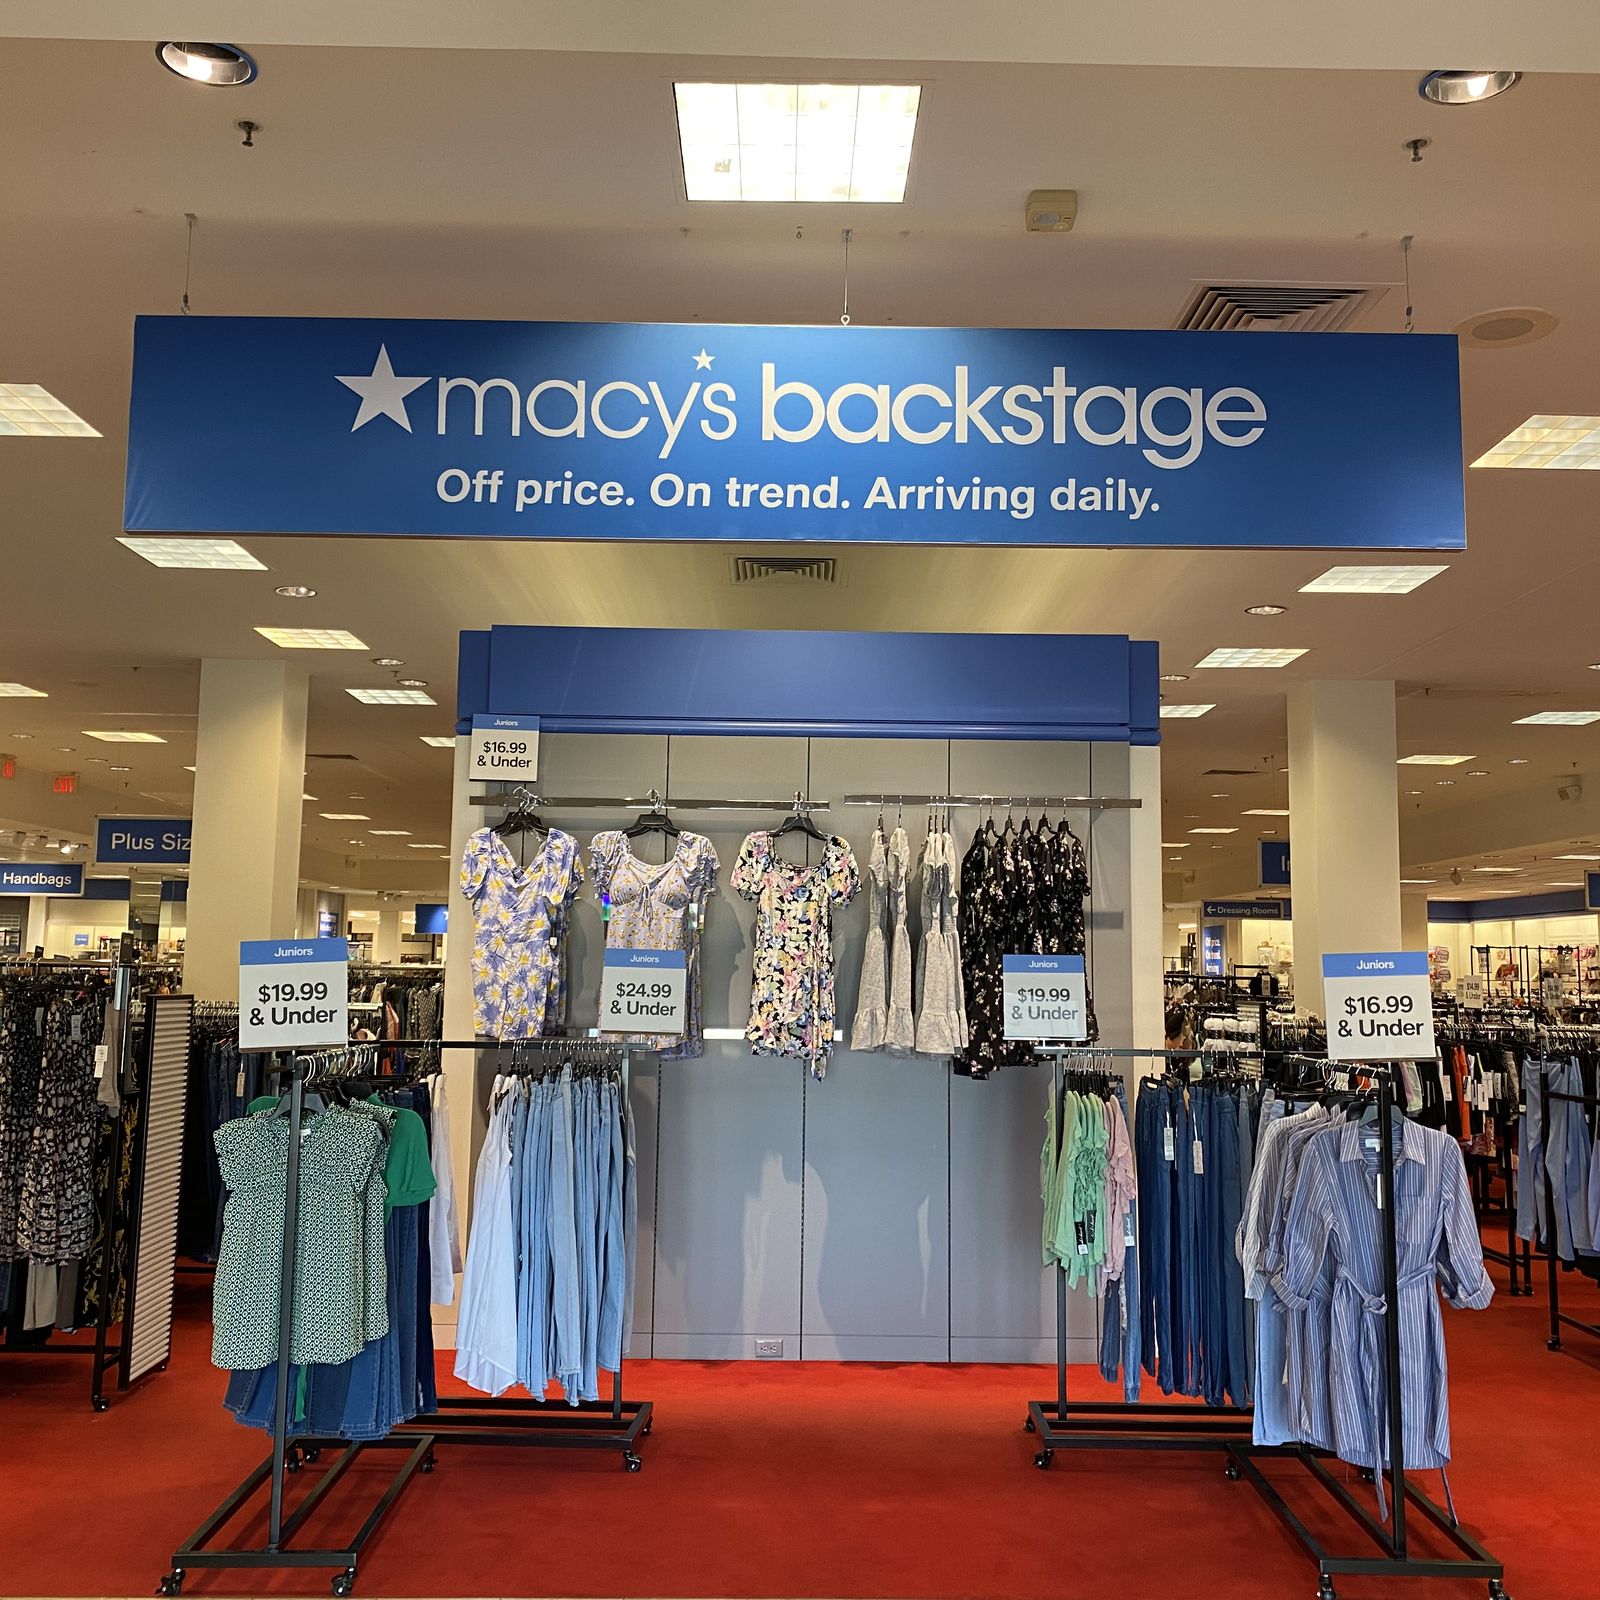 7 things to know about the new Macy's Backstage Outlet